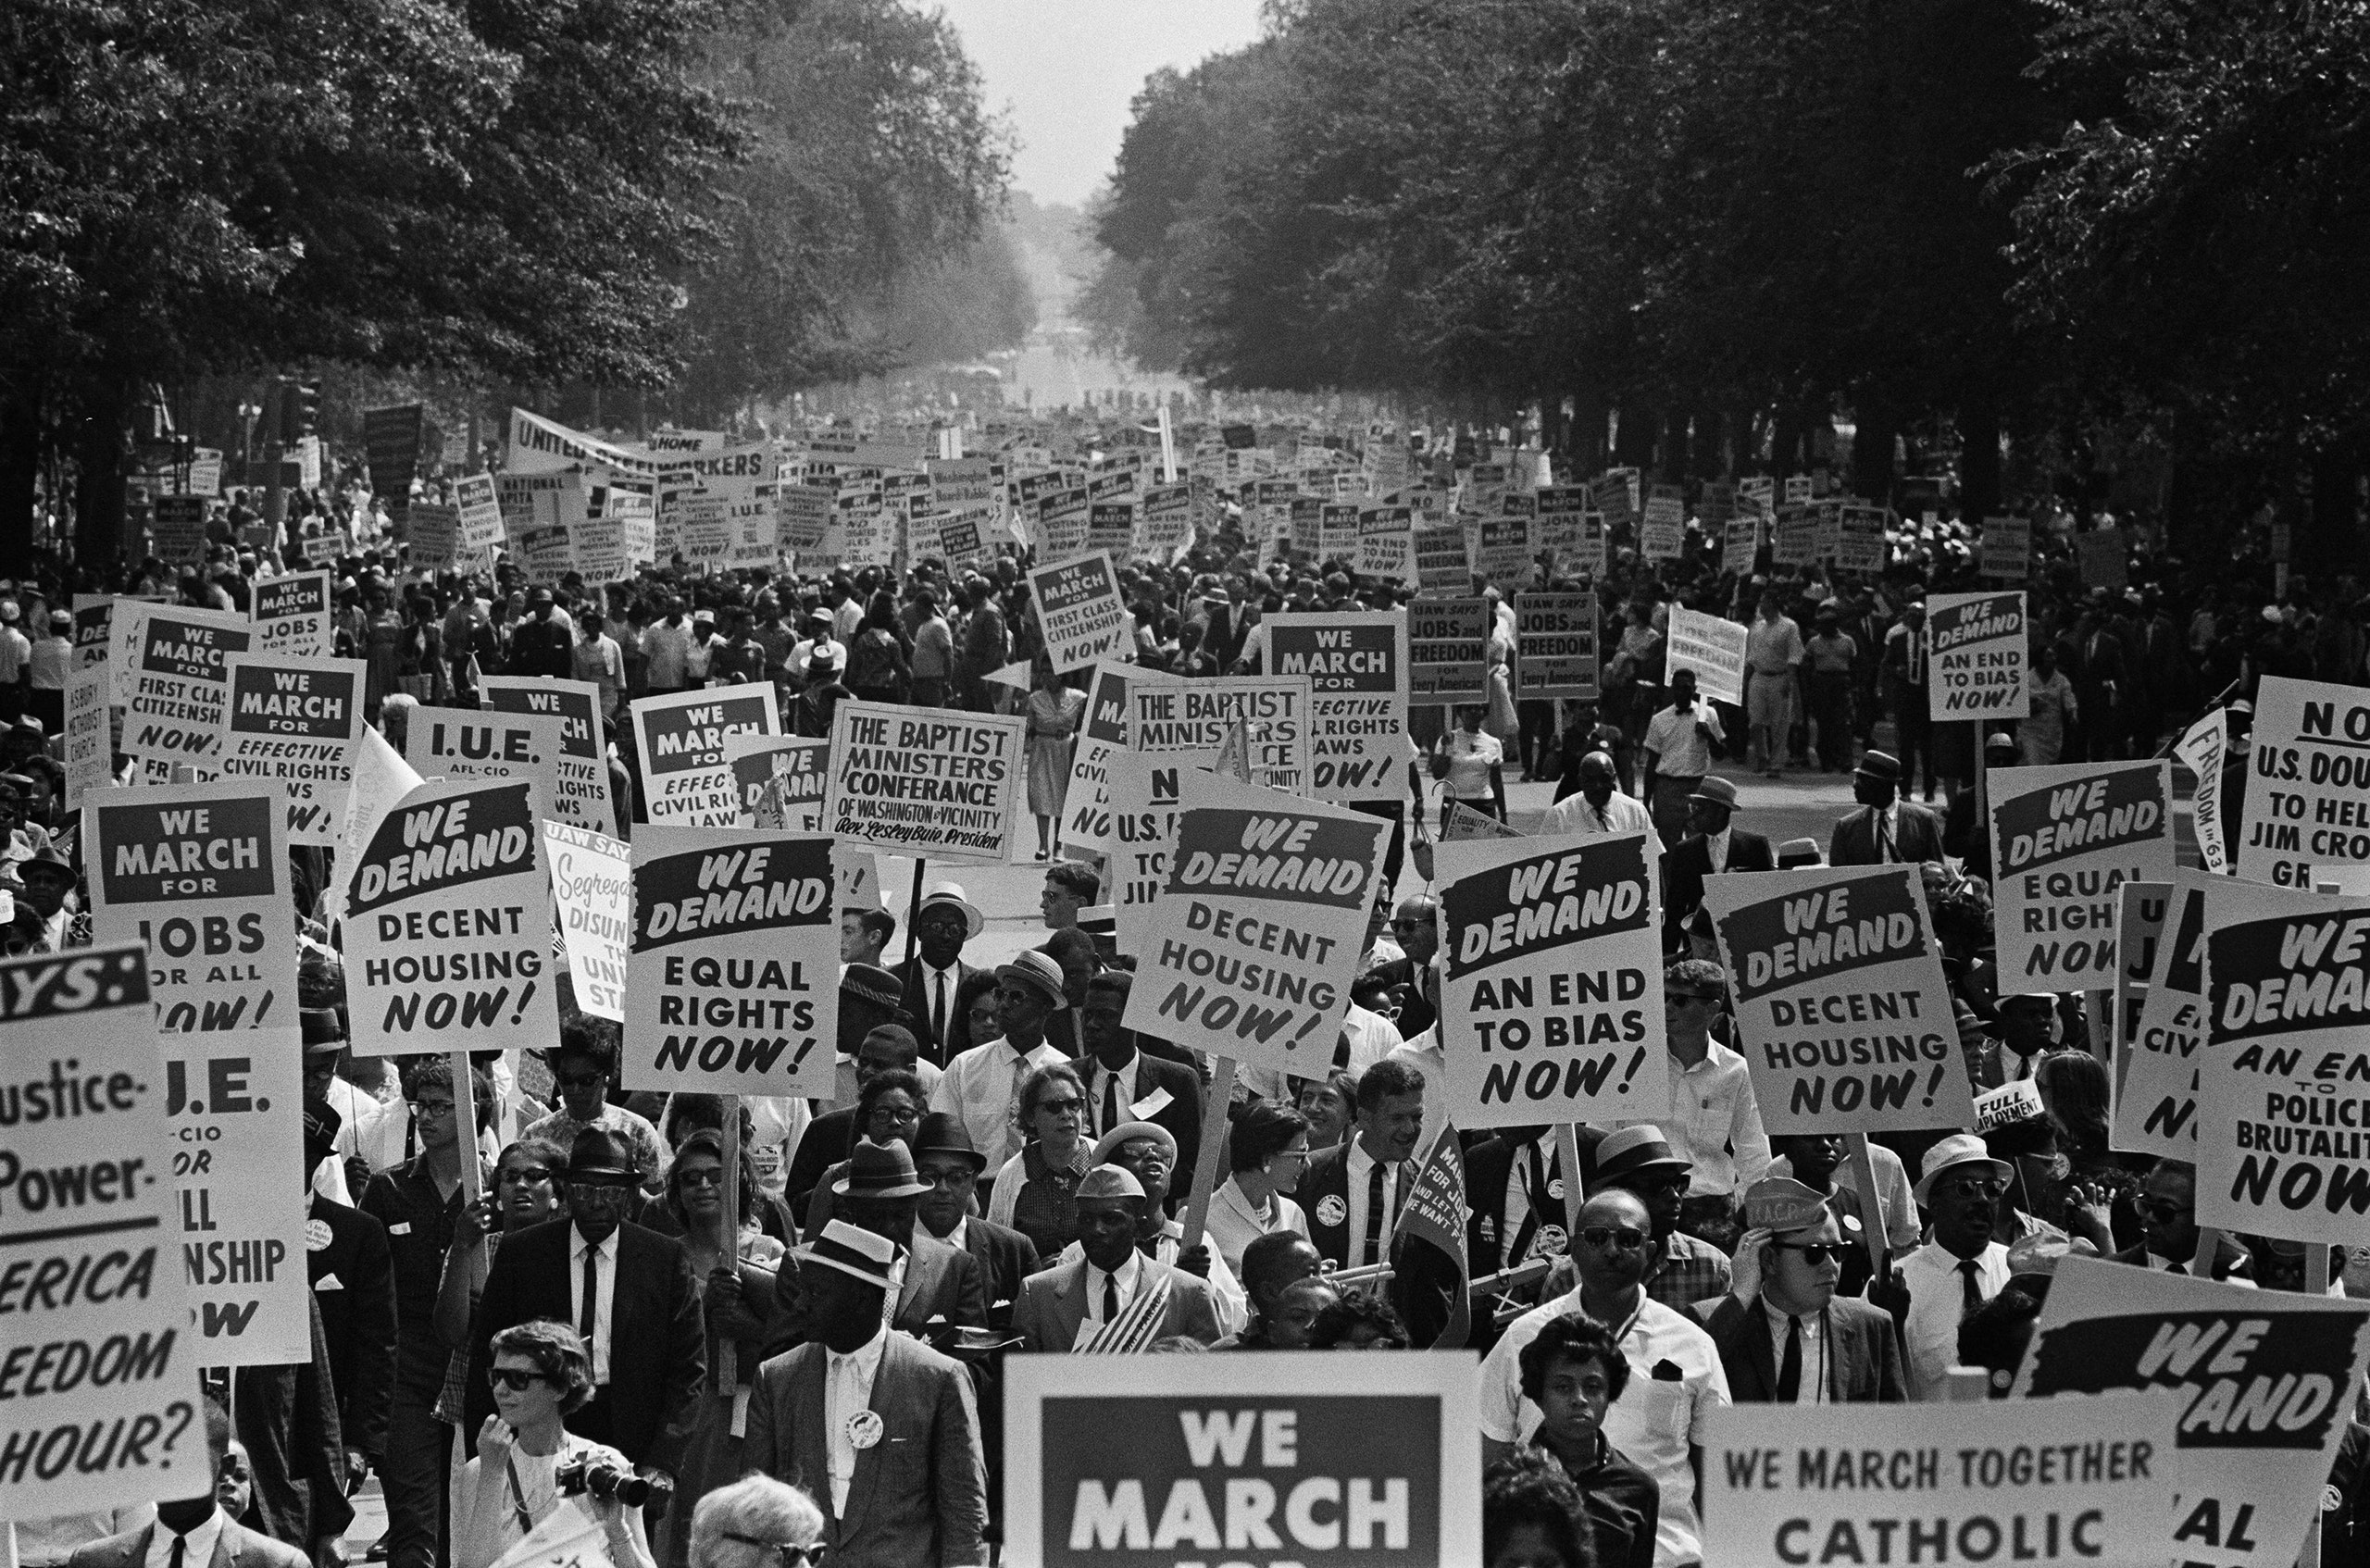 Scene from the March on Washington for Jobs and Freedom in 1963